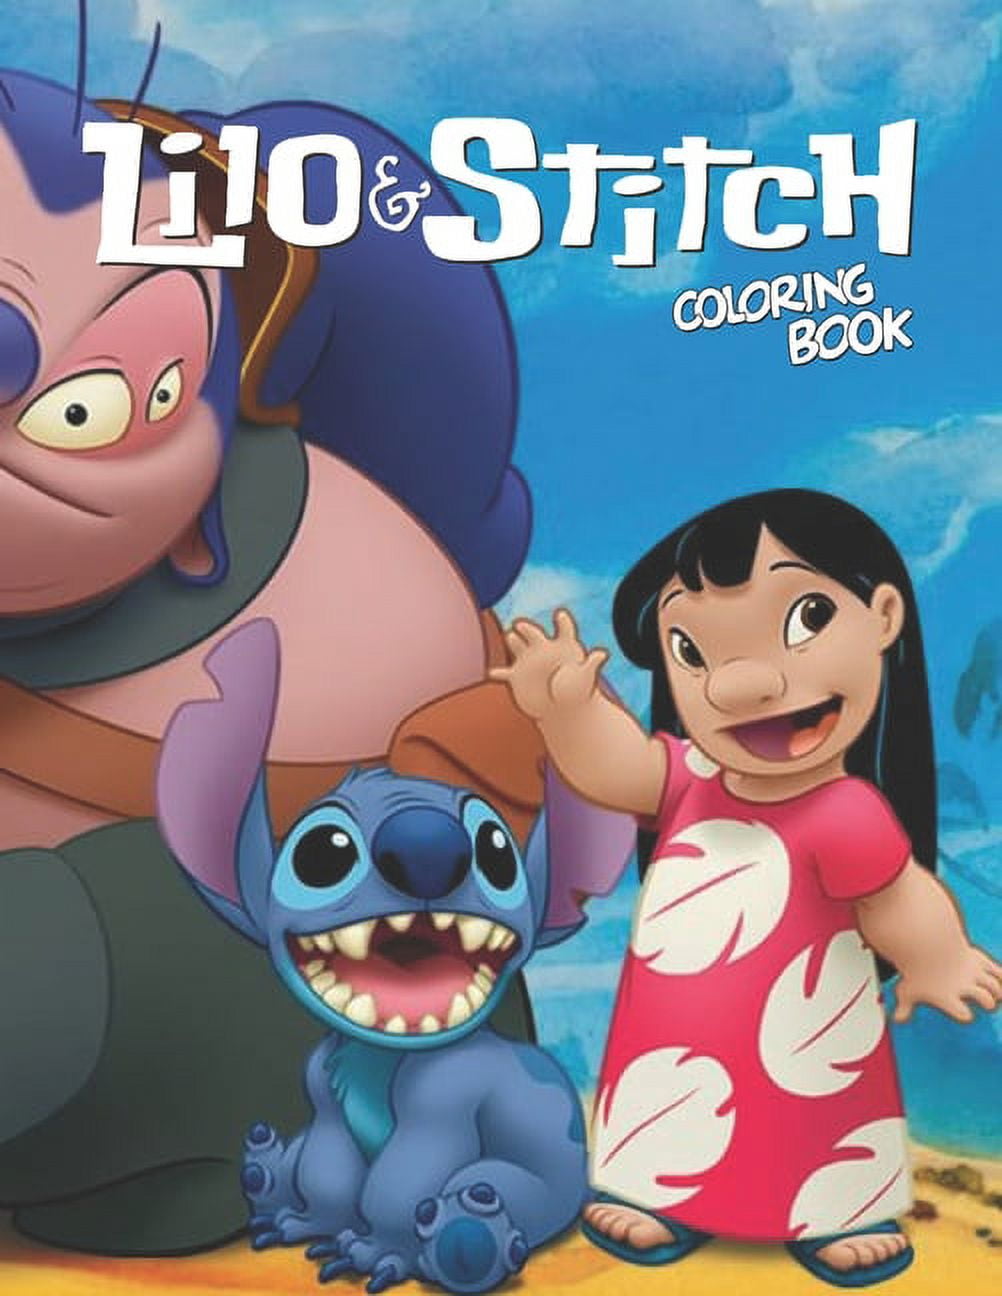 Lilo & Stitch Coloring Book : Great Coloring Book For Kids and Adults -  Lilo & stitch Coloring Book With High Quality Images (Paperback)